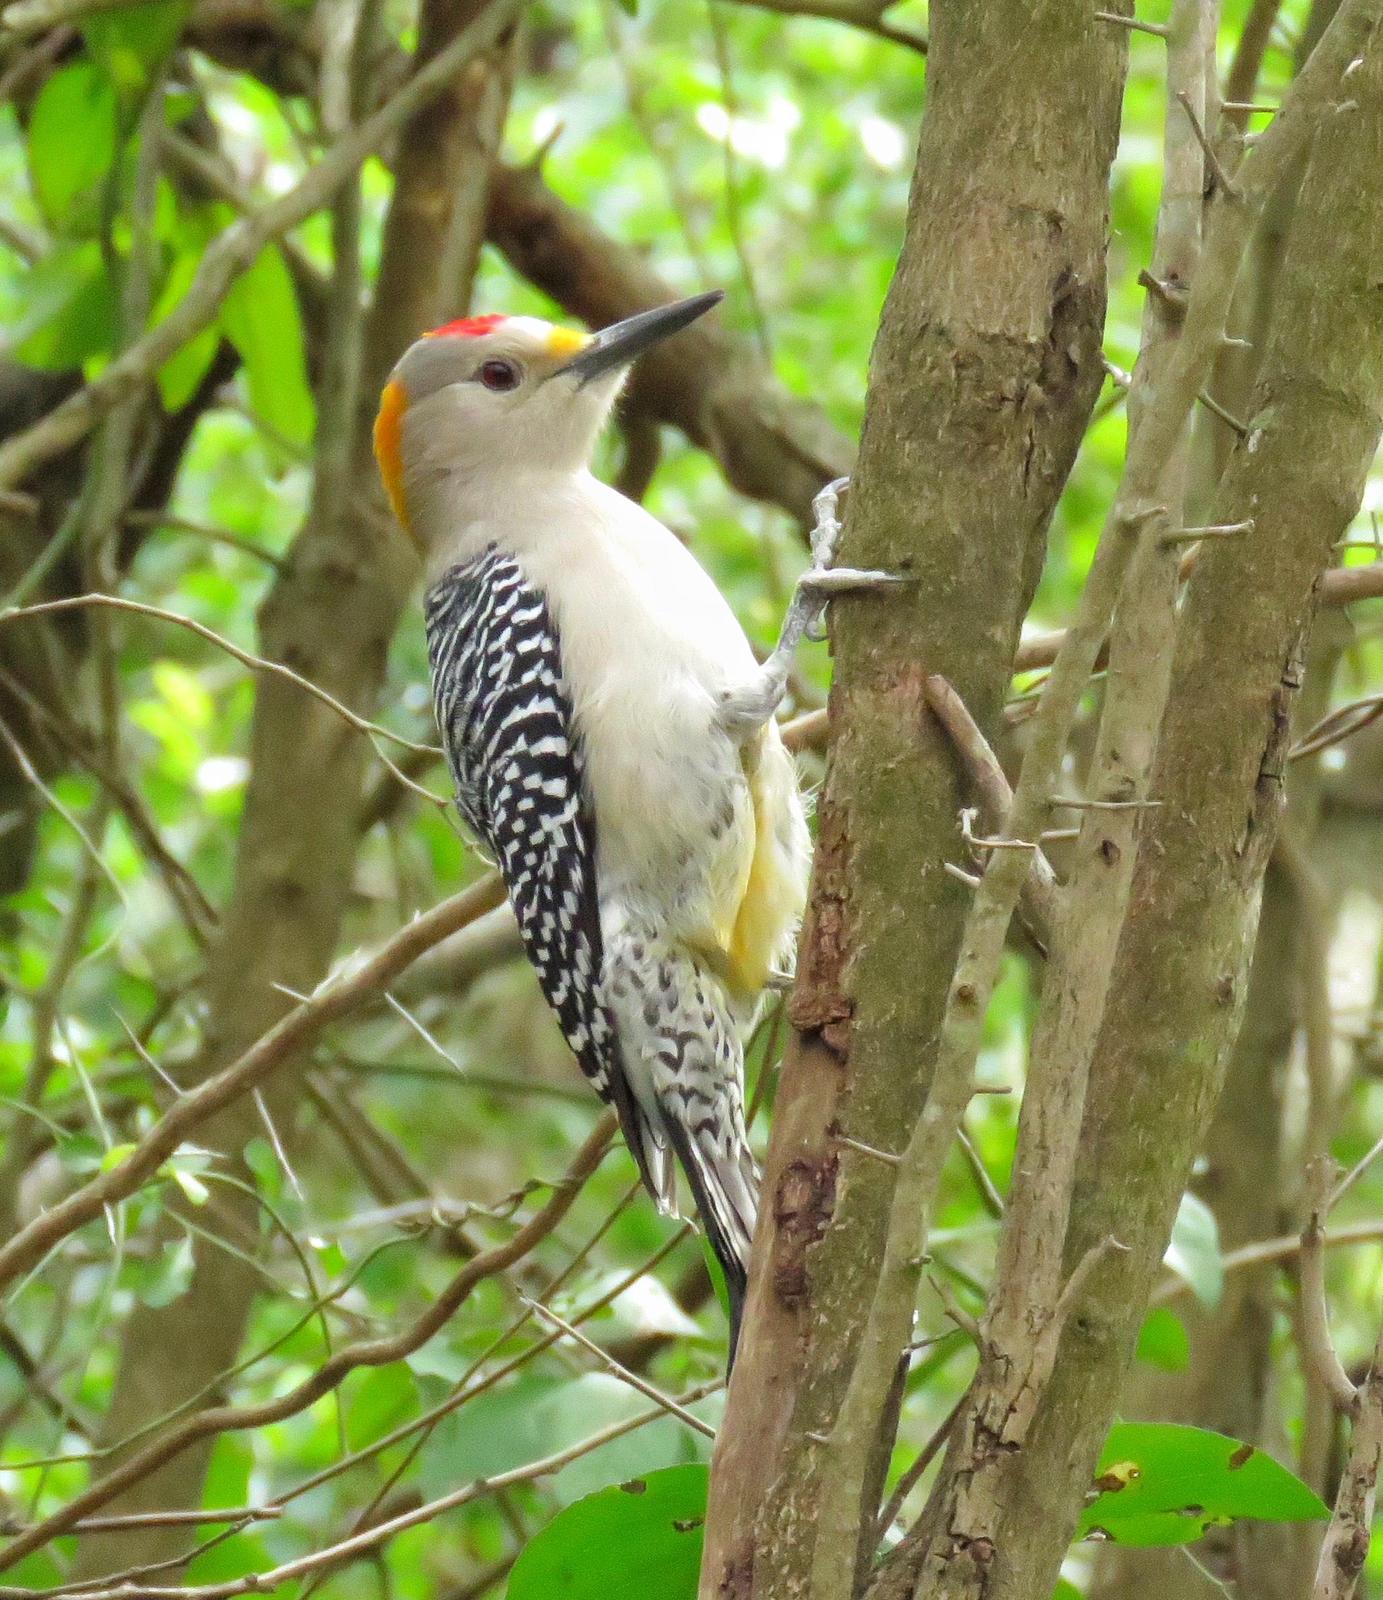 Golden-fronted Woodpecker Photo by Lisa Cancade Hackett